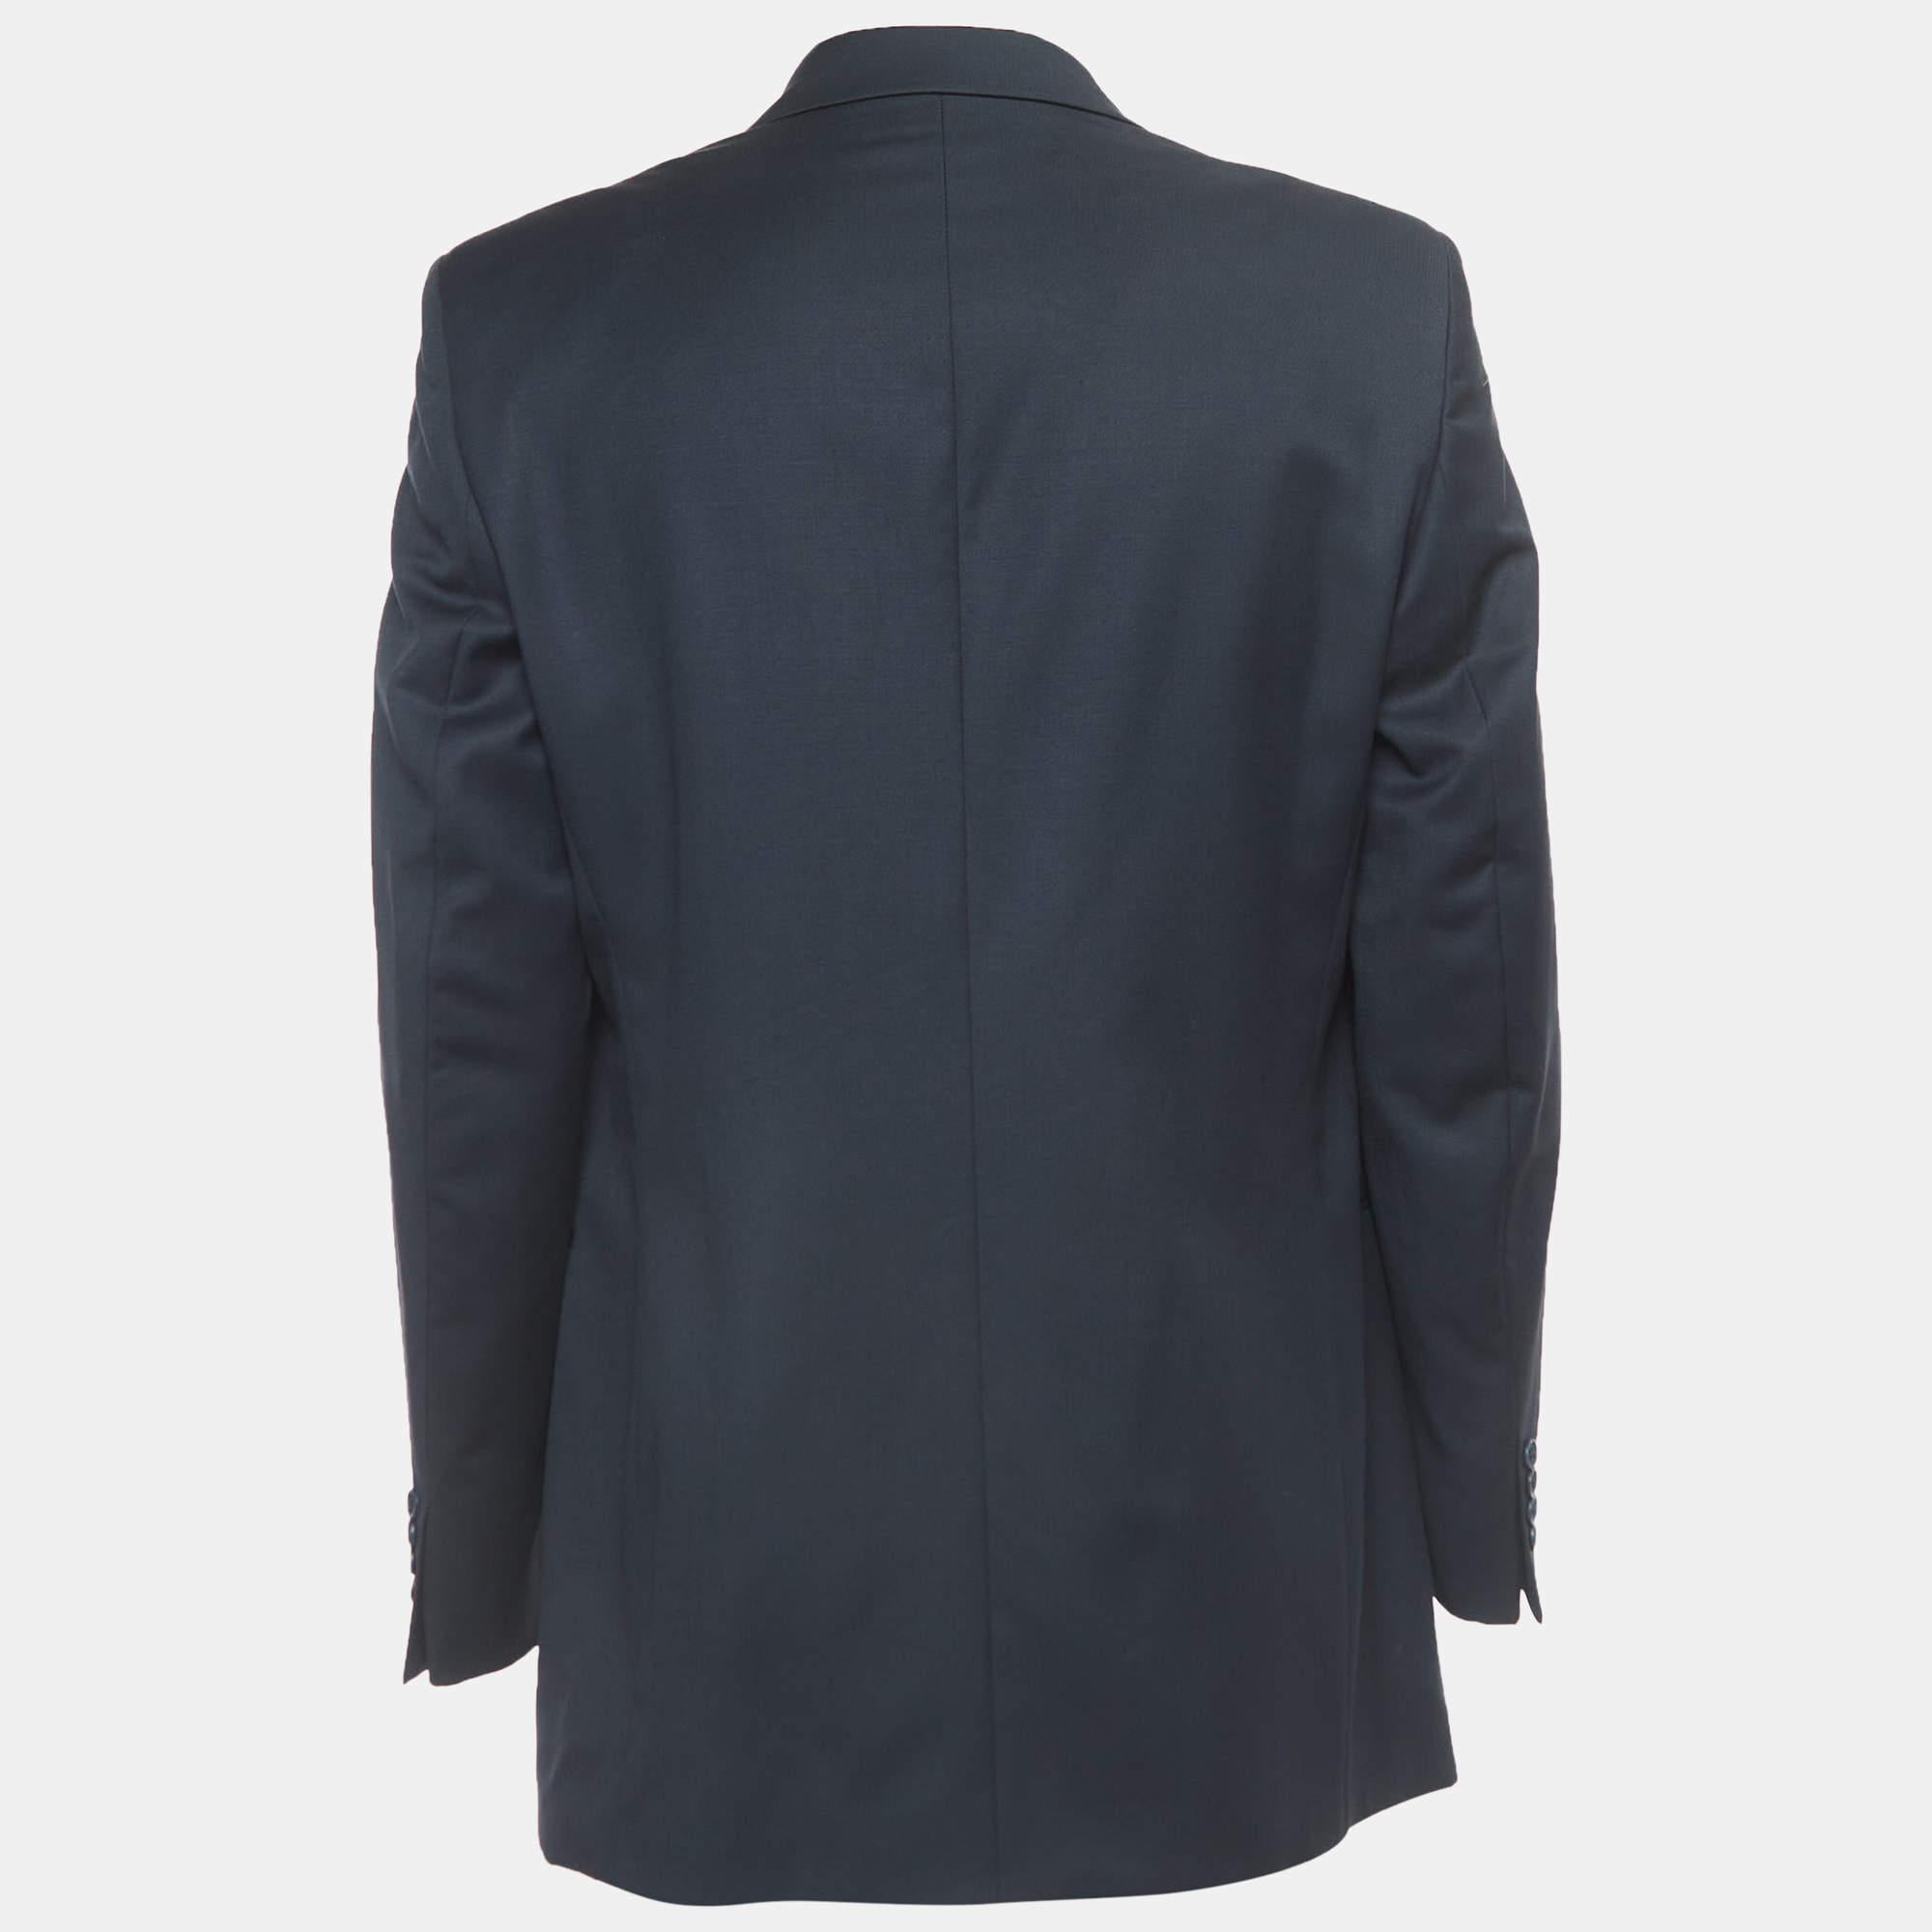 This blazer brings you both class and luxury as you wear it. It is highlighted with long sleeves, thus granting a polished finish.

